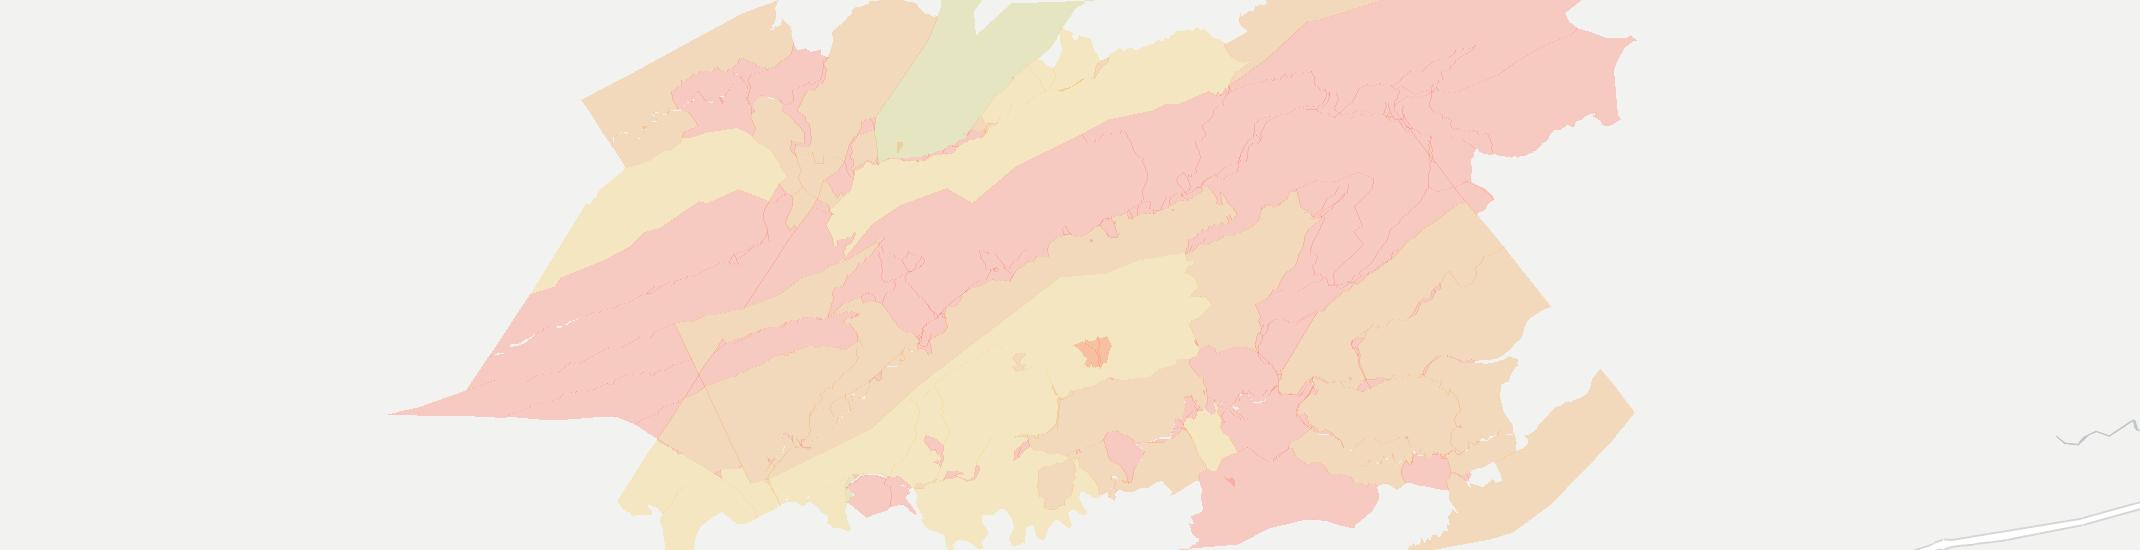 Tannersville Internet Competition Map. Click for interactive map.